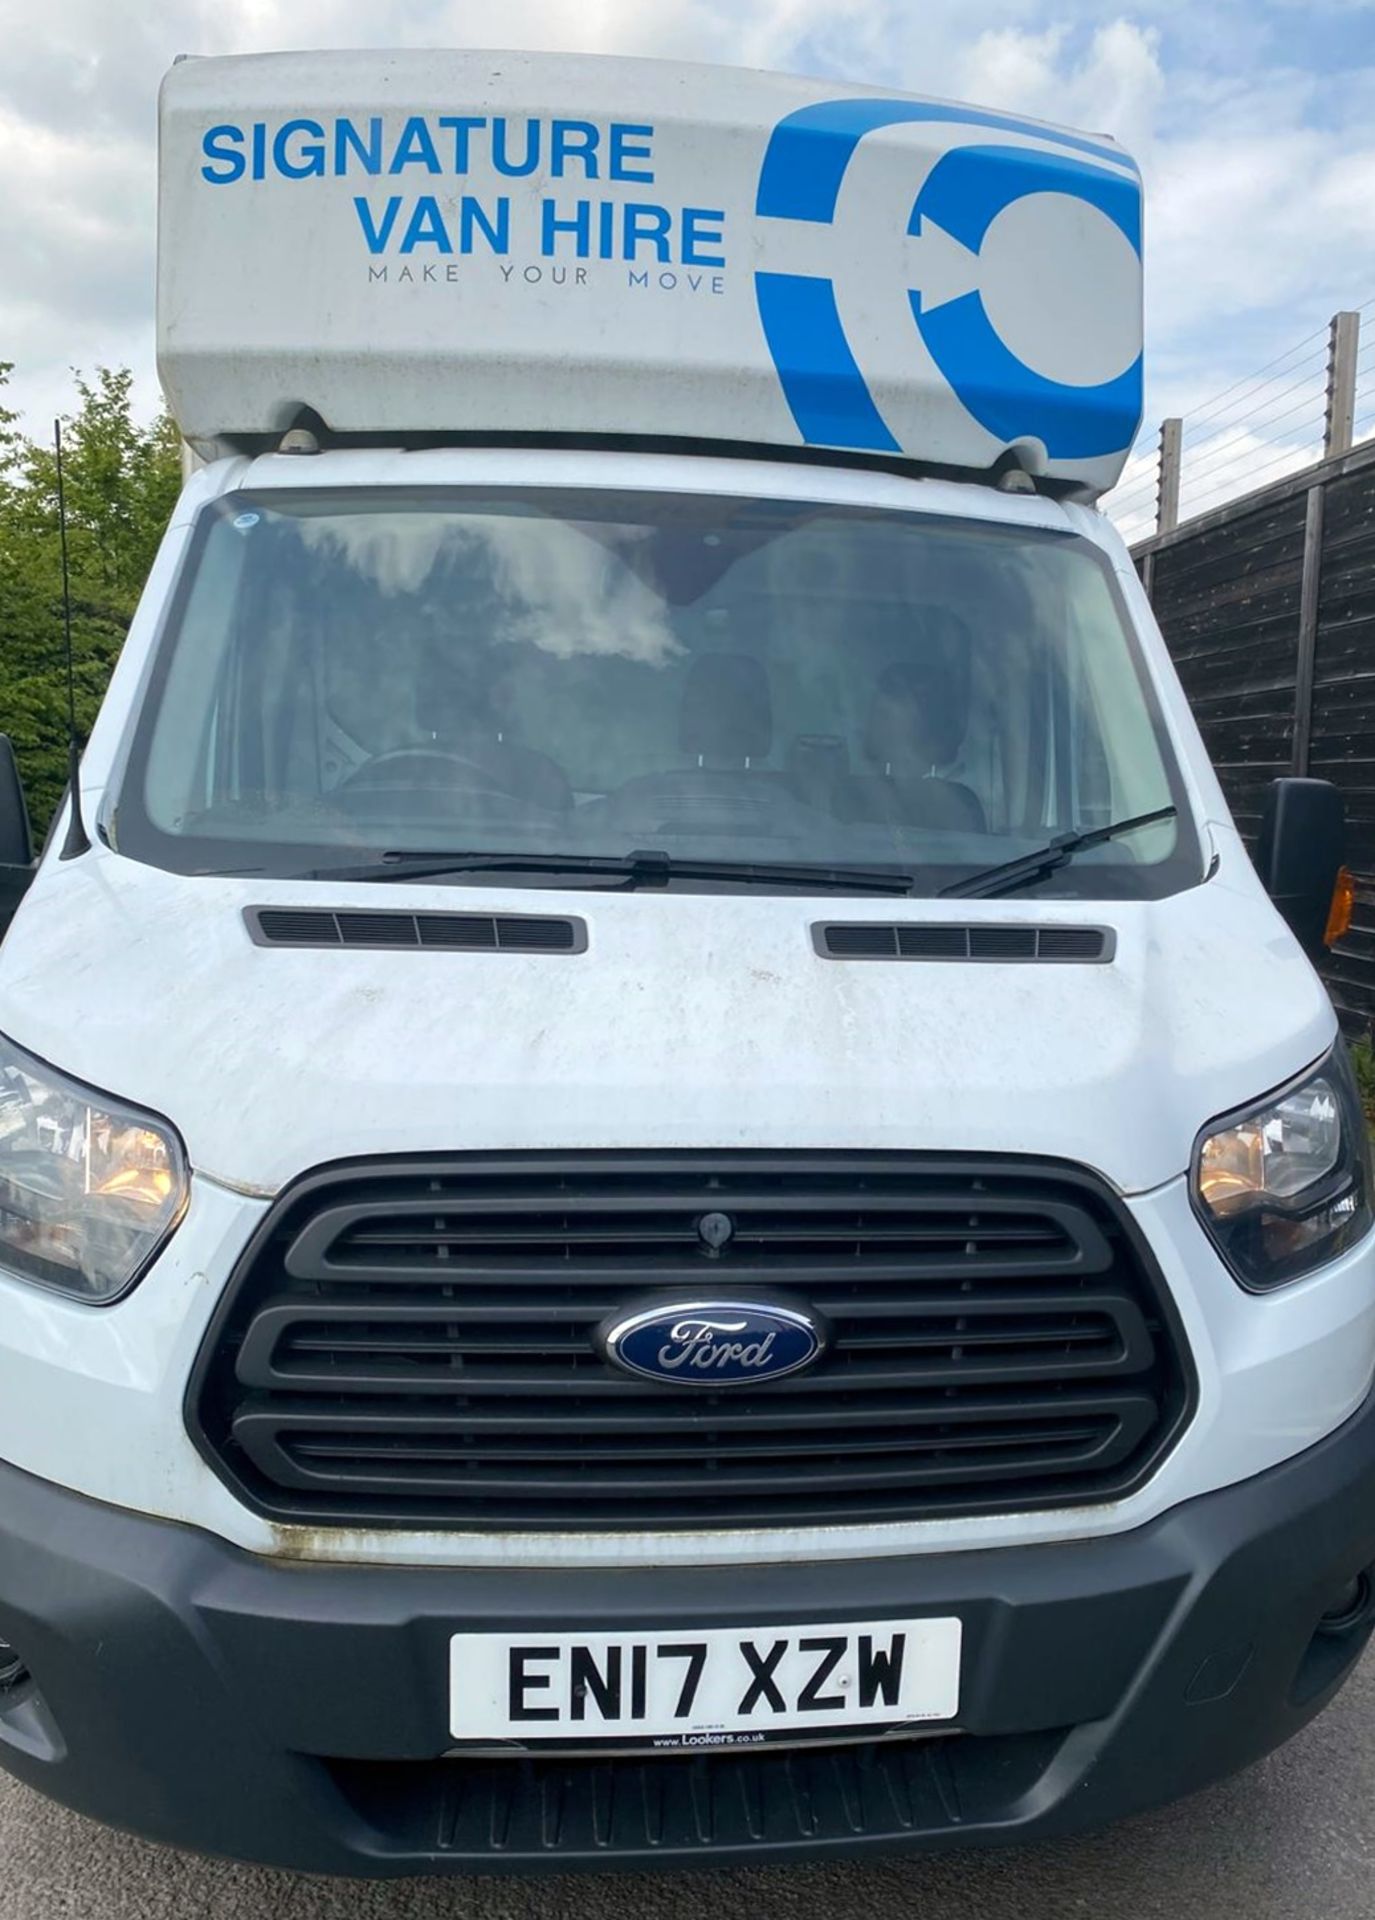 2017 Ford Transit 350 Luton Box Van With Tail Lift - 12 Month MOT - 29,857 Miles - ULEZ COMPLIANT - Image 5 of 22